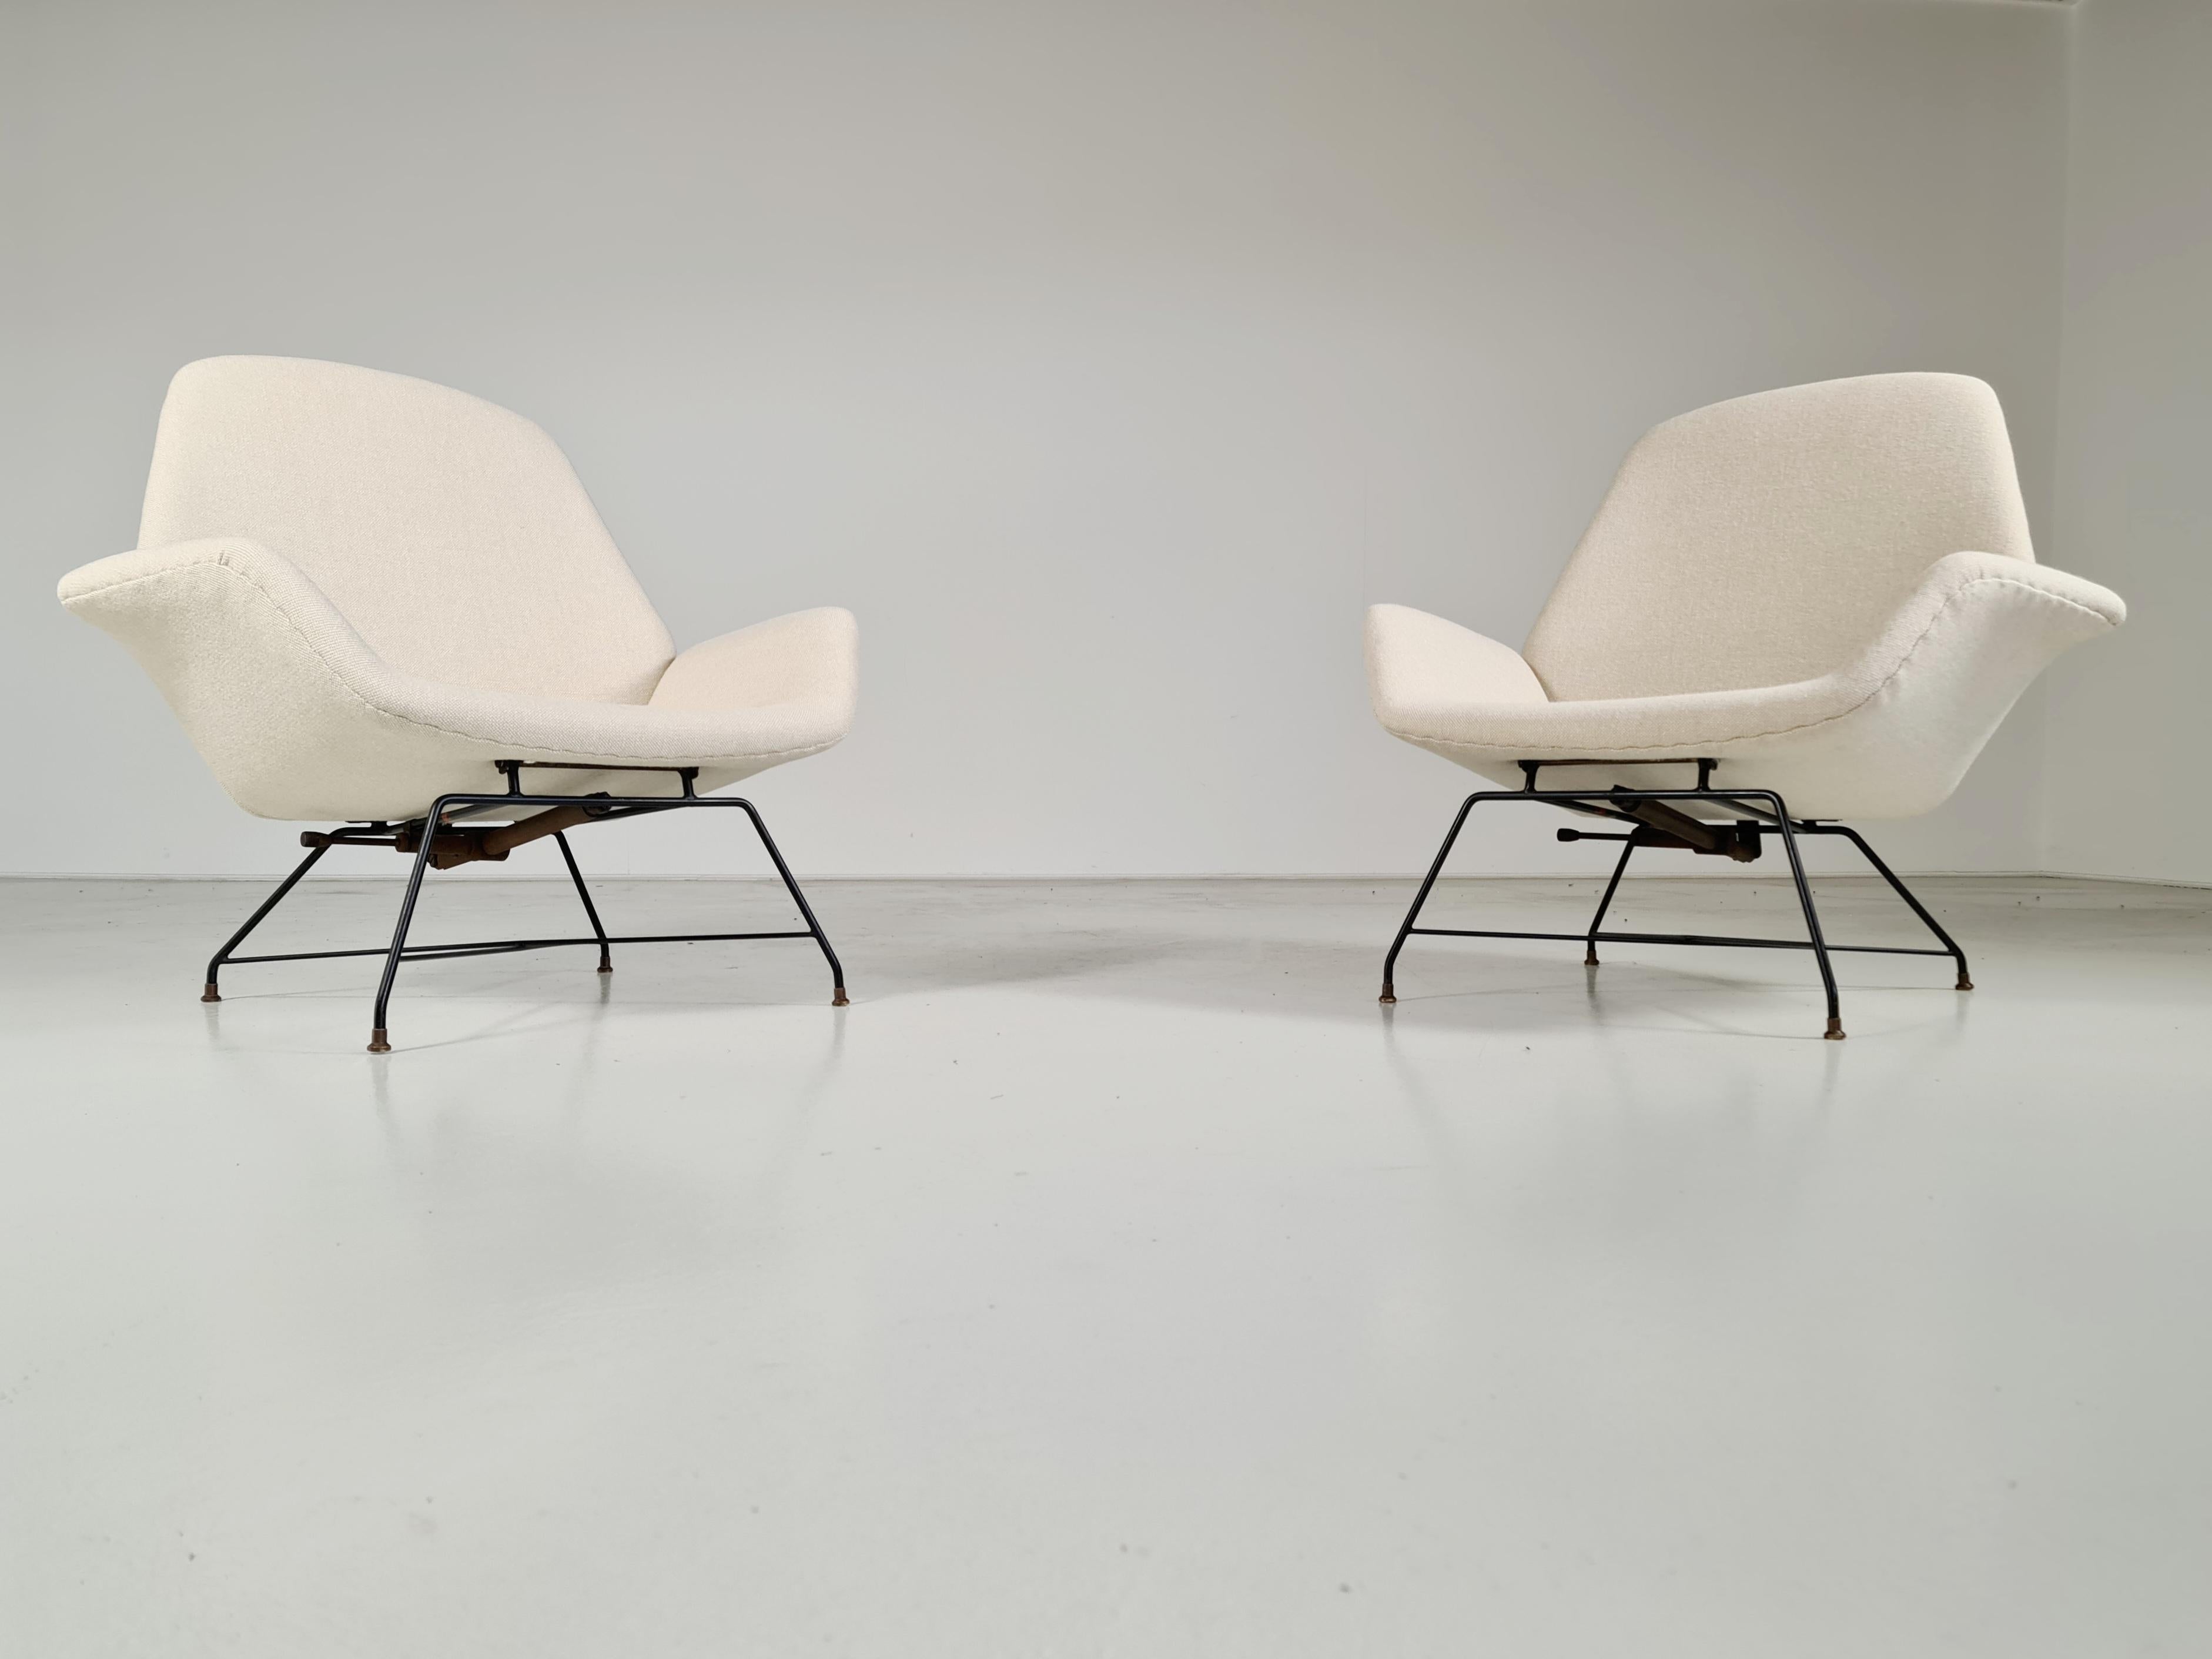 Mid-Century Modern ‘Lotus’ Lounge Chairs in cream wool fabric by Augusto Bozzi for Saporiti, 1960s For Sale